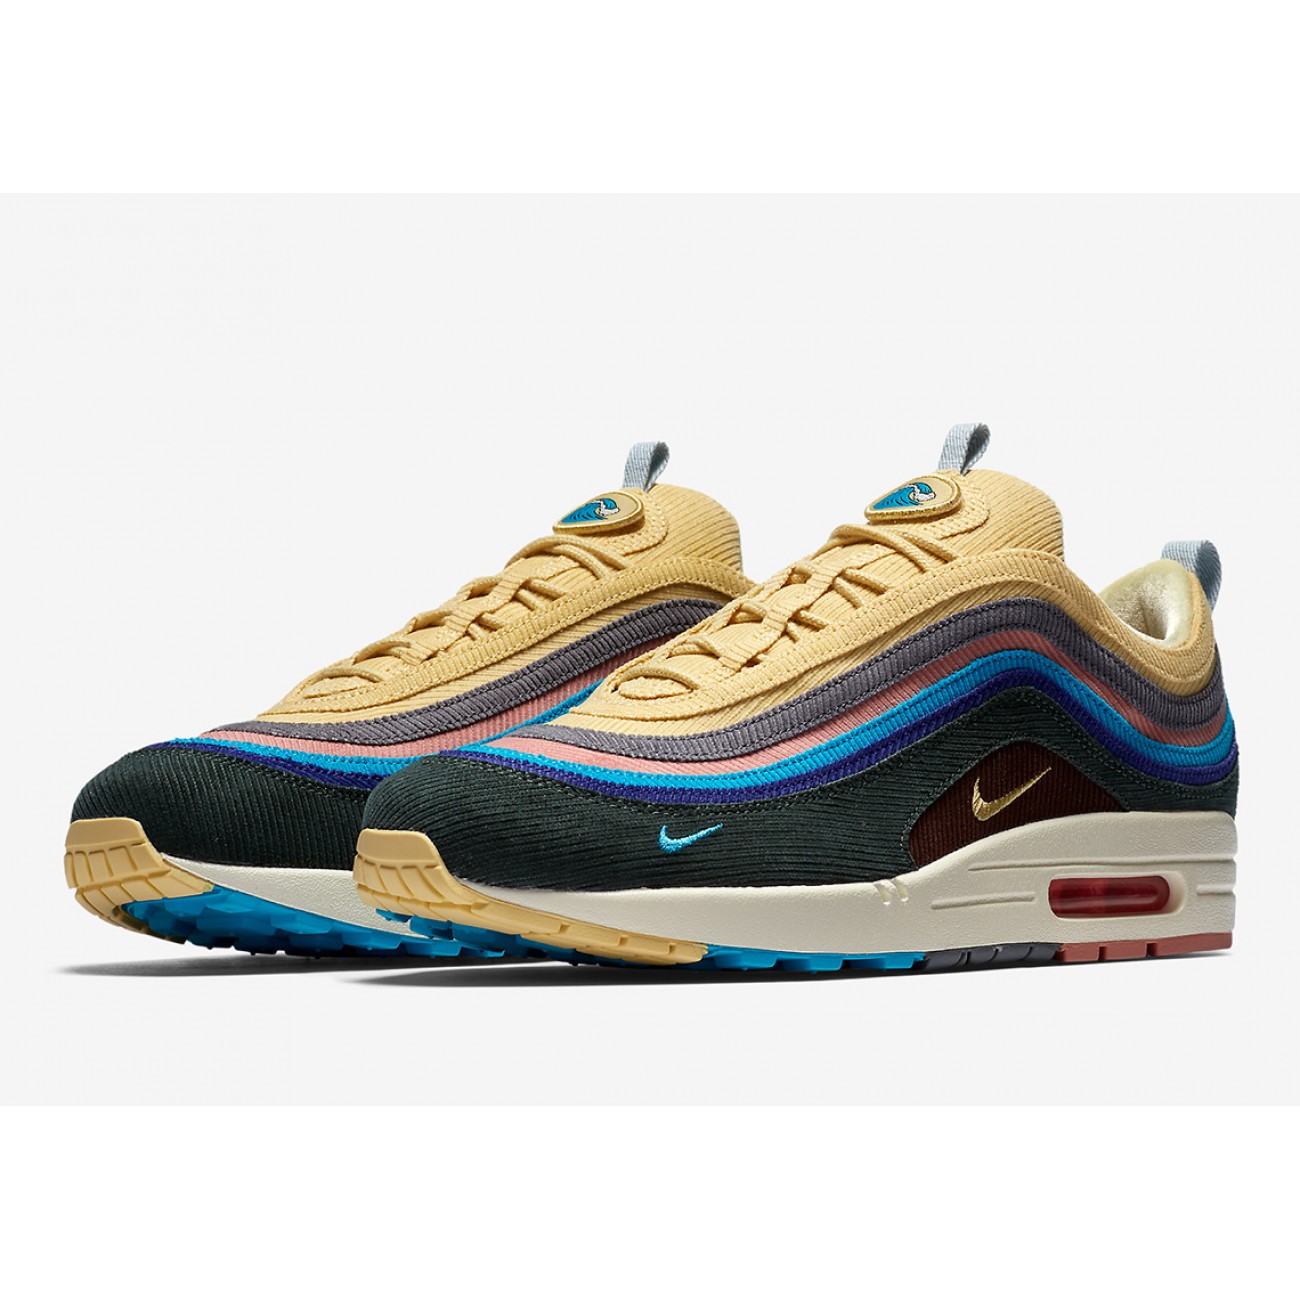 Nike Air Max 1/97 VF SW "Sean Wotherspoon" For Sale Release Date AJ4219-400